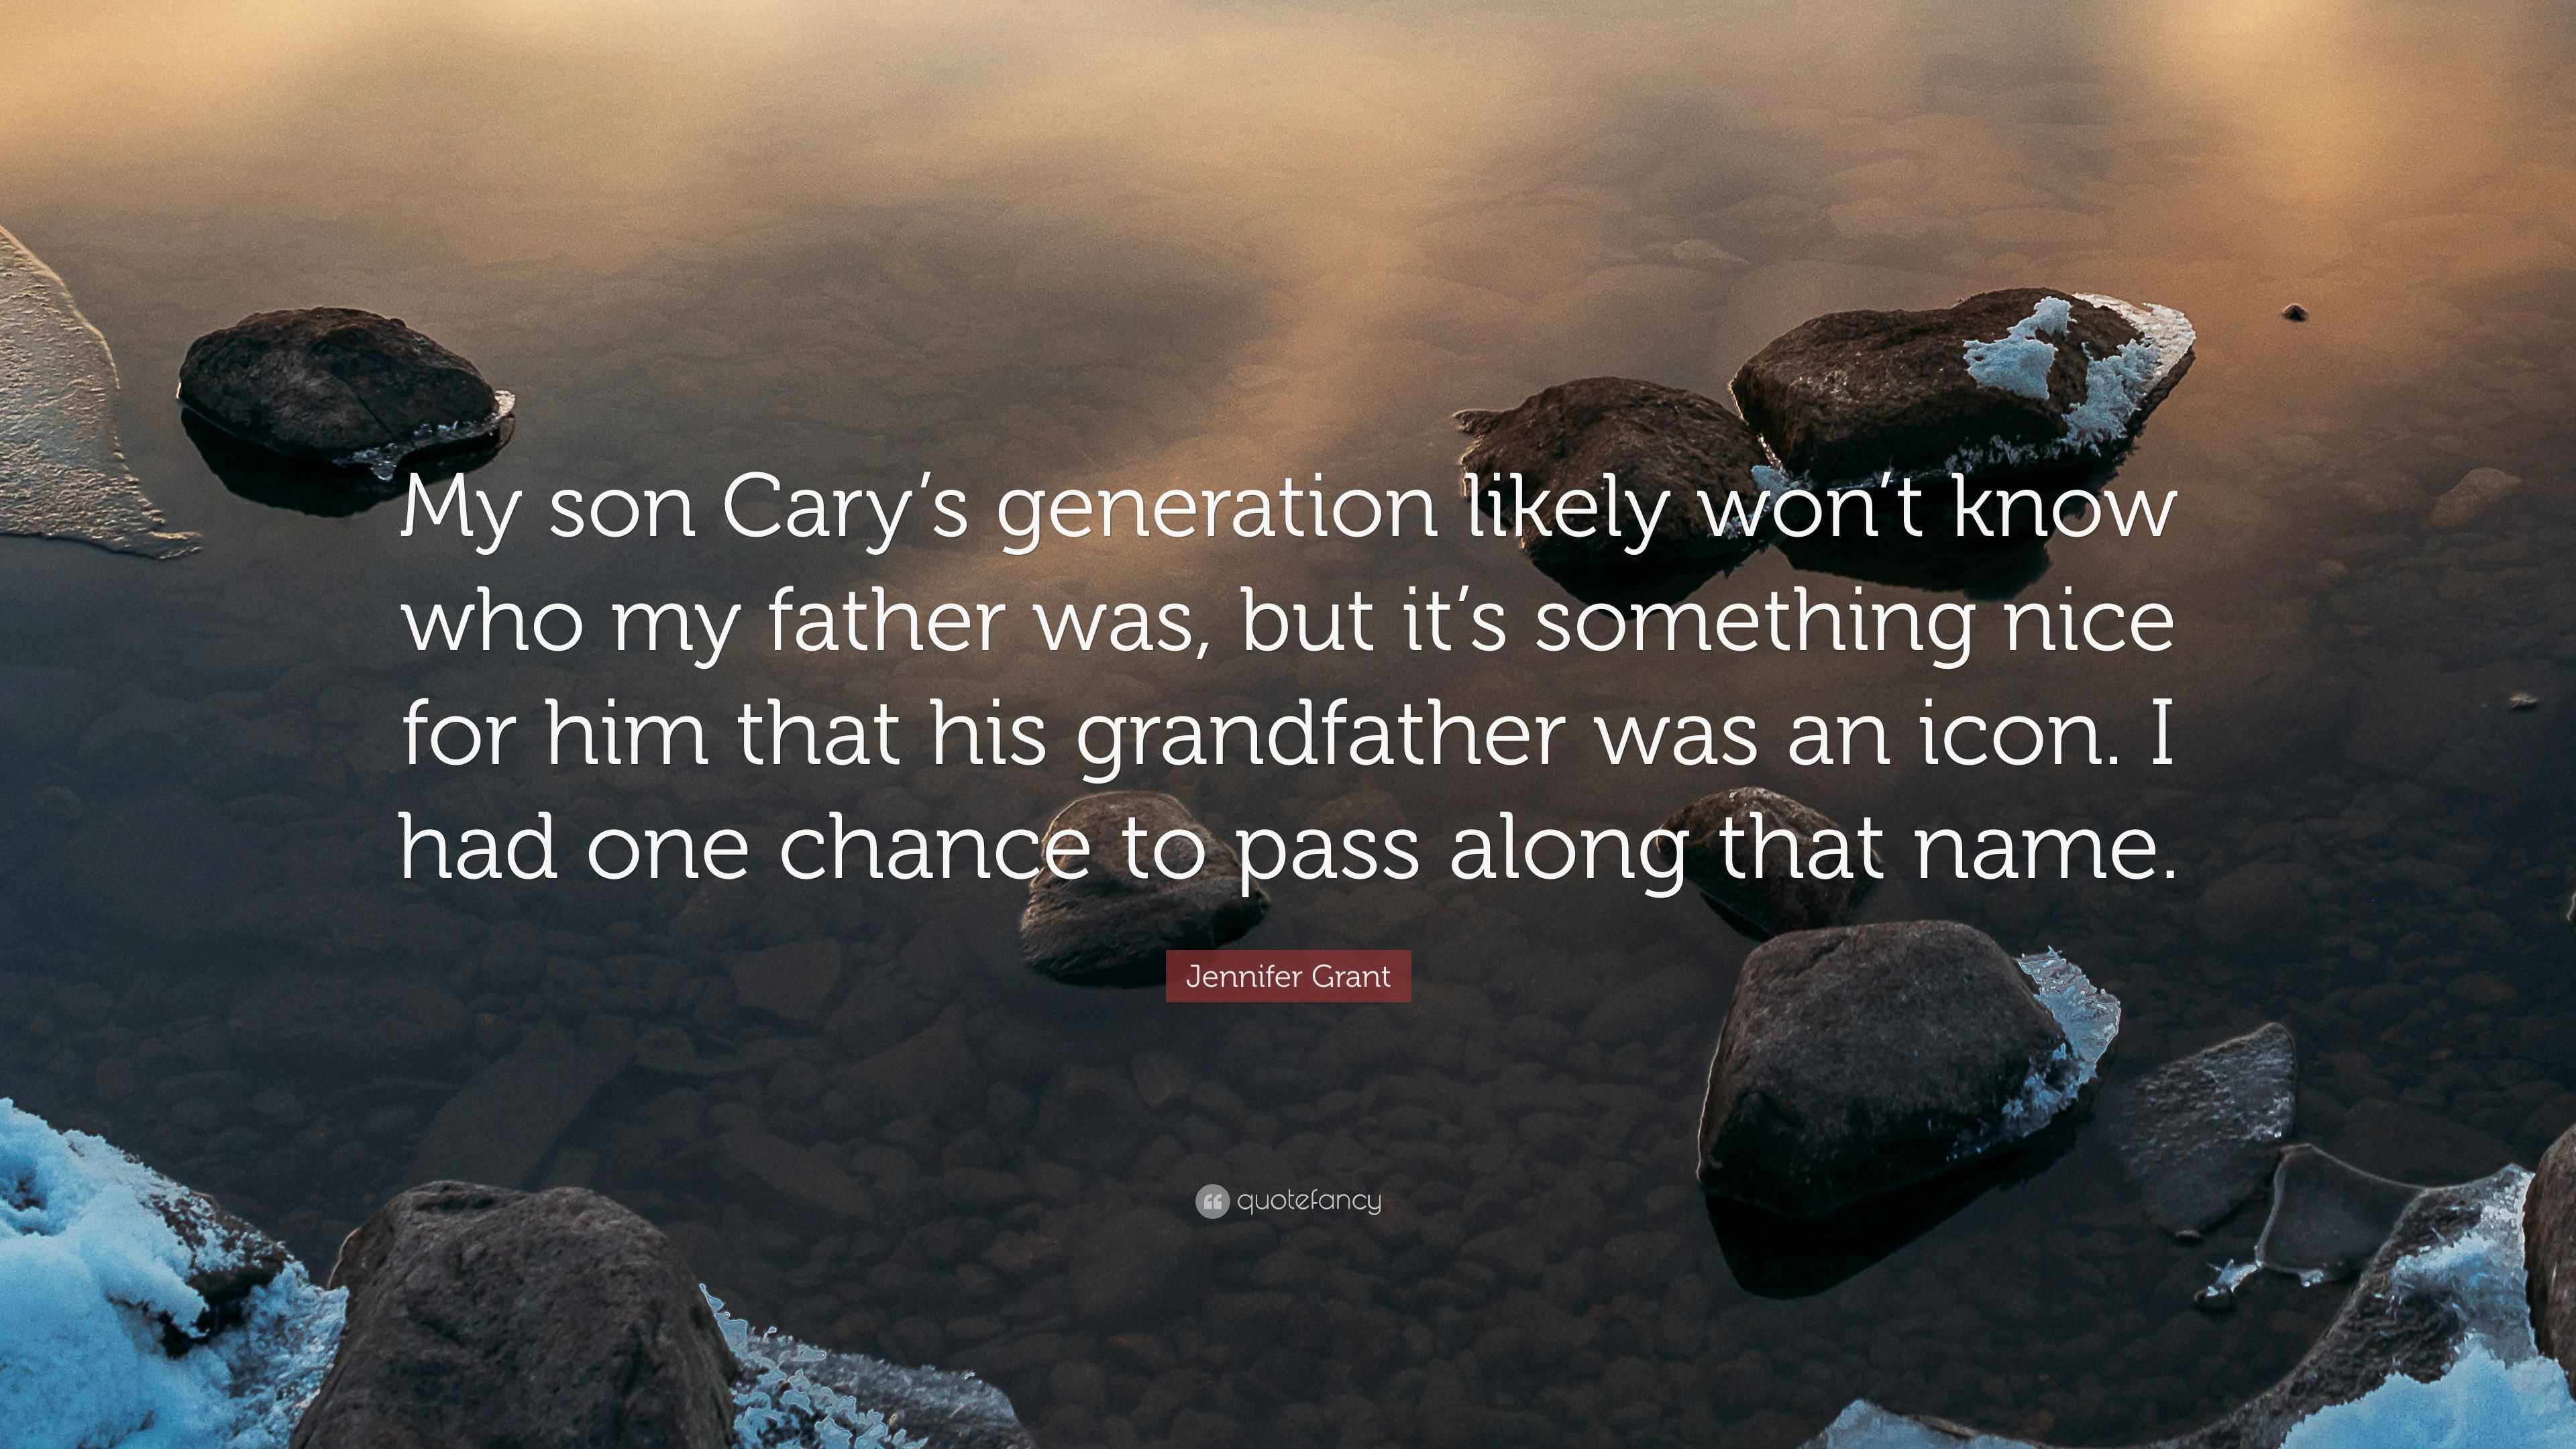 https://quotefancy.com/media/wallpaper/3840x2160/5222678-Jennifer-Grant-Quote-My-son-Cary-s-generation-likely-won-t-know.jpg